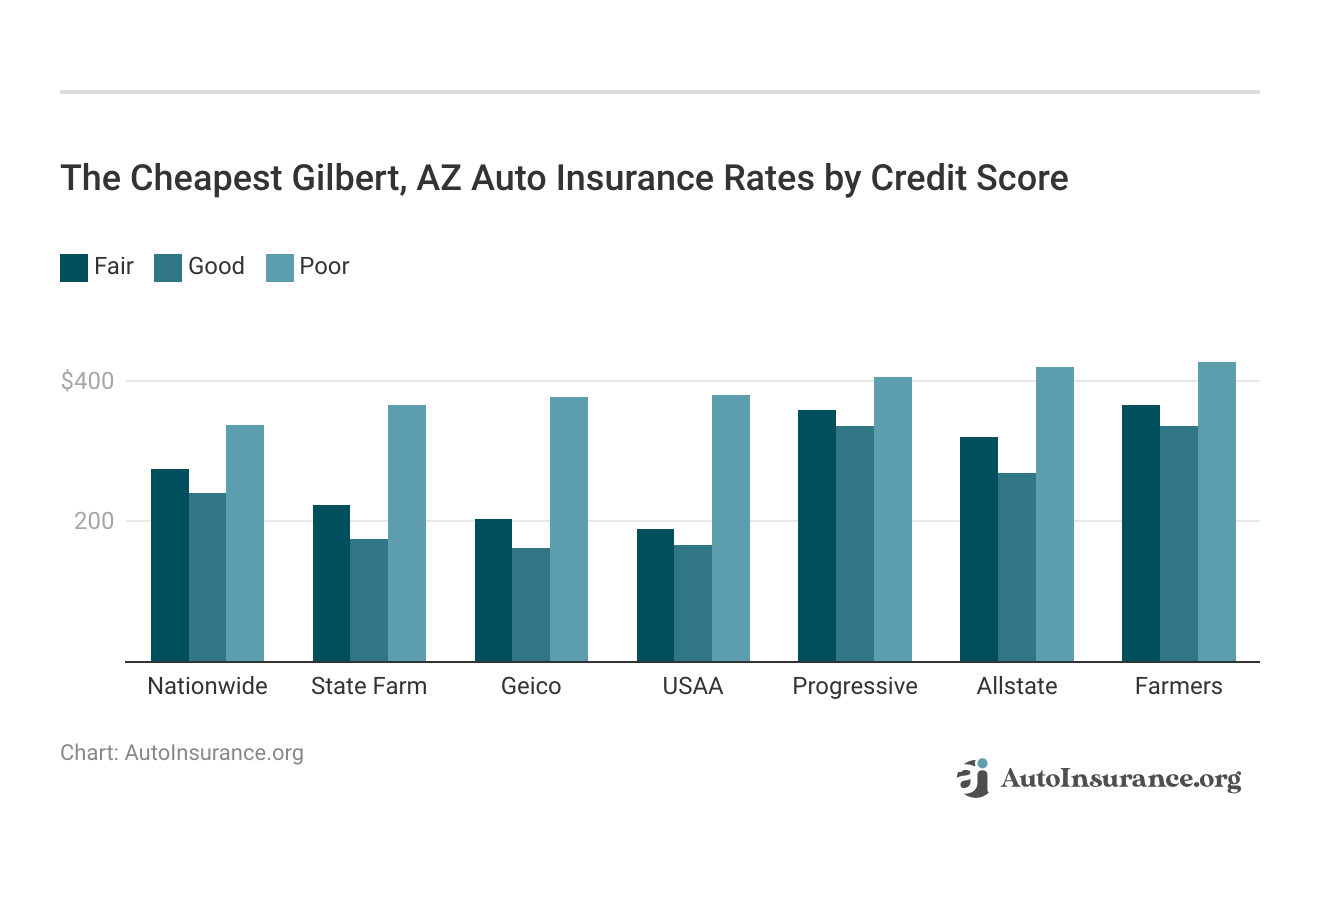 <h3>The Cheapest Gilbert, AZ Auto Insurance Rates by Credit Score</h3>